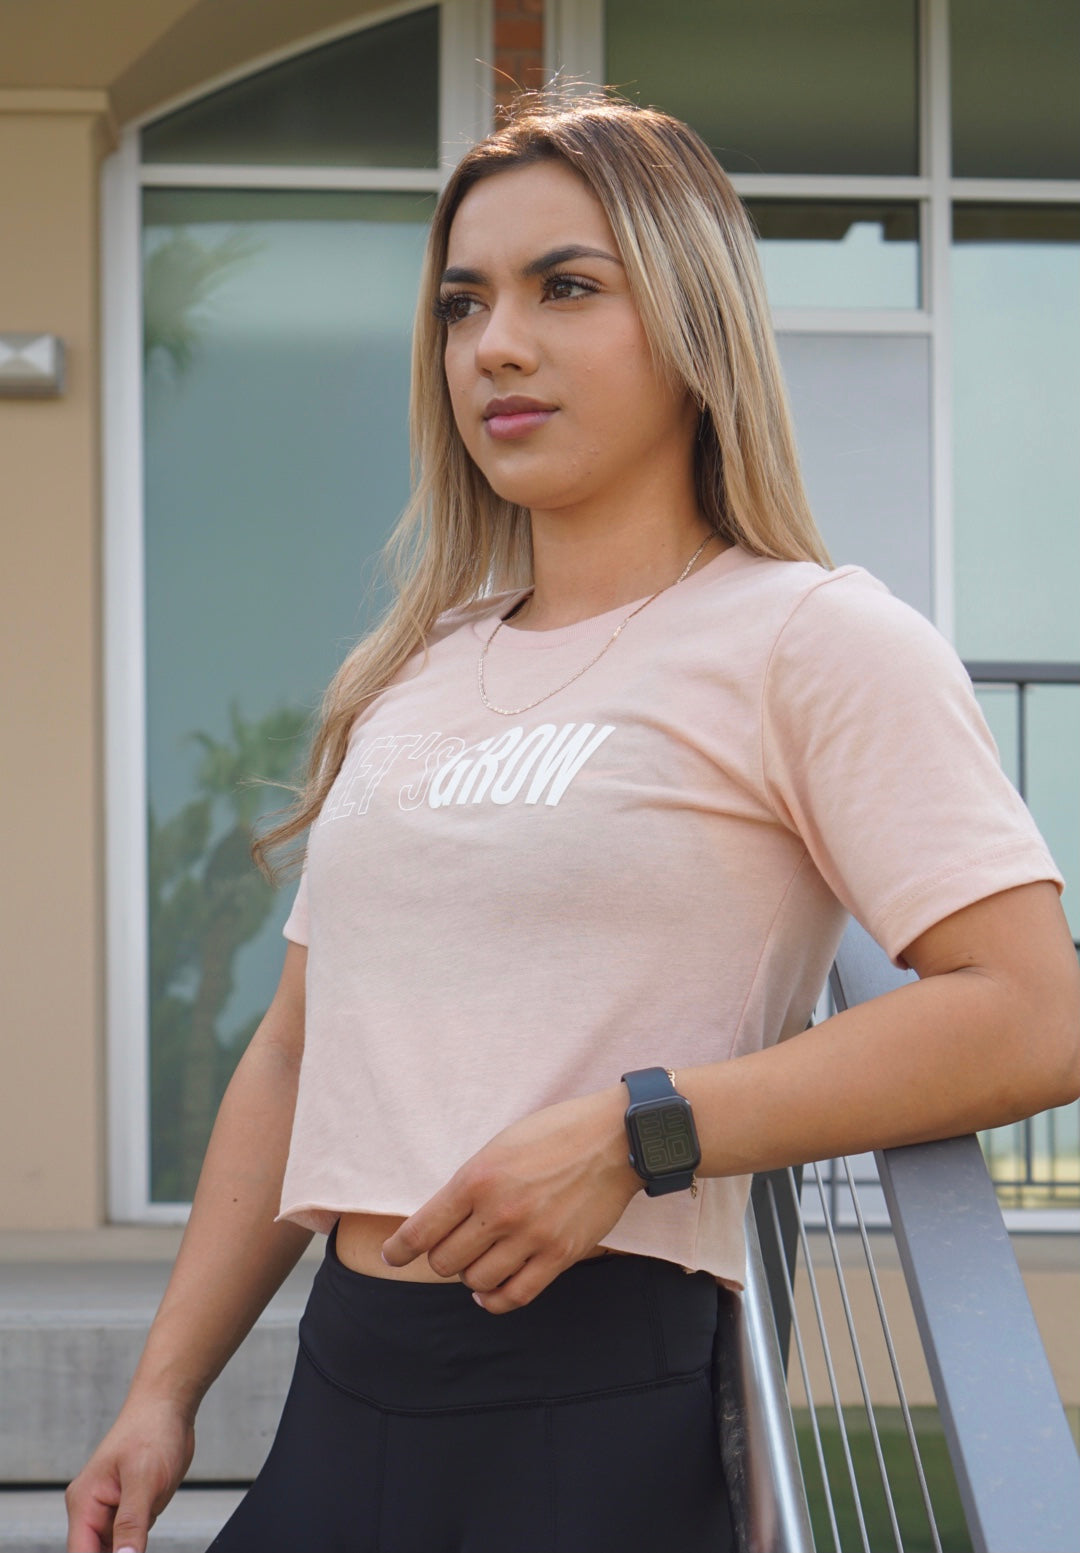 Let's Grow Outline Crop Top-Heather Peach/White